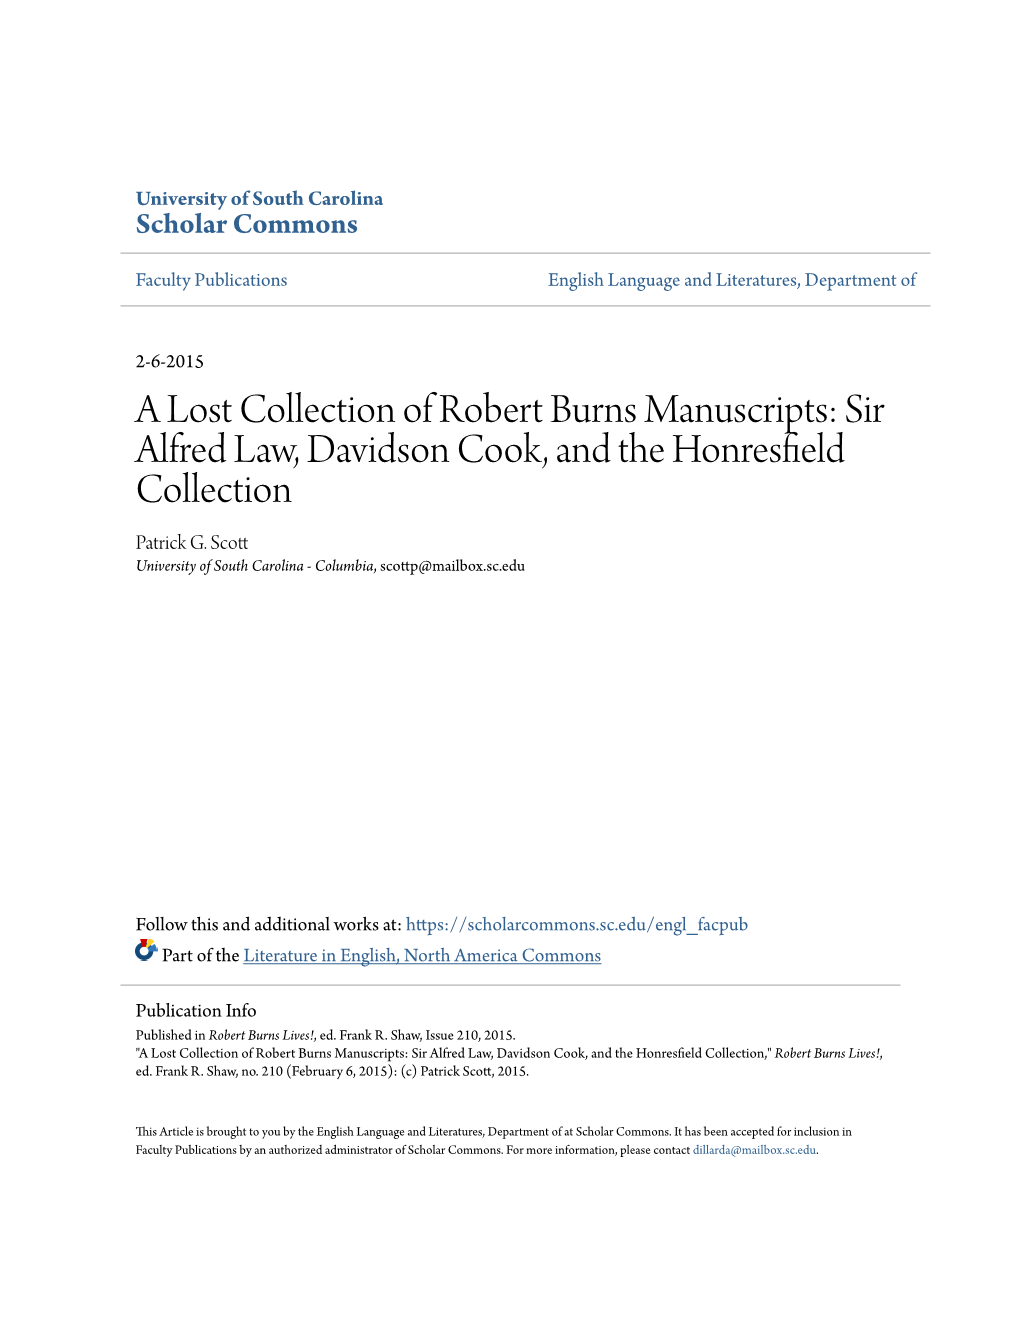 A Lost Collection of Robert Burns Manuscripts: Sir Alfred Law, Davidson Cook, and the Honresfield Collection Patrick G